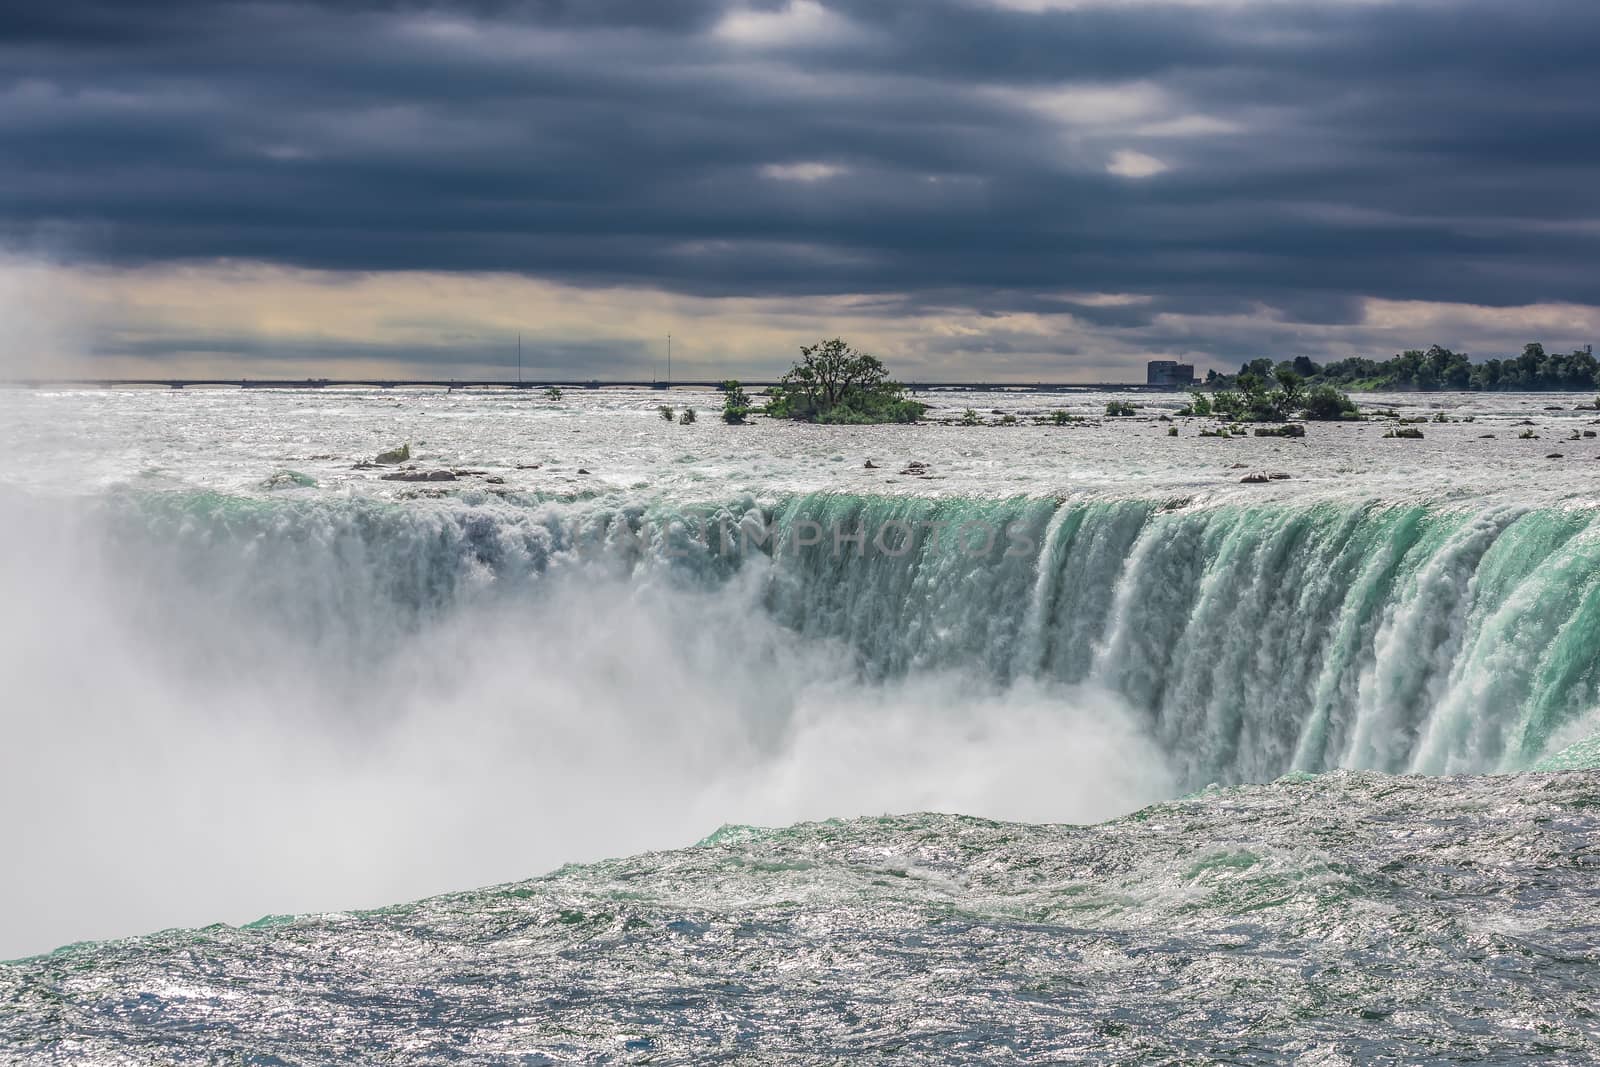 Niagara falls from the canadian side by petkolophoto